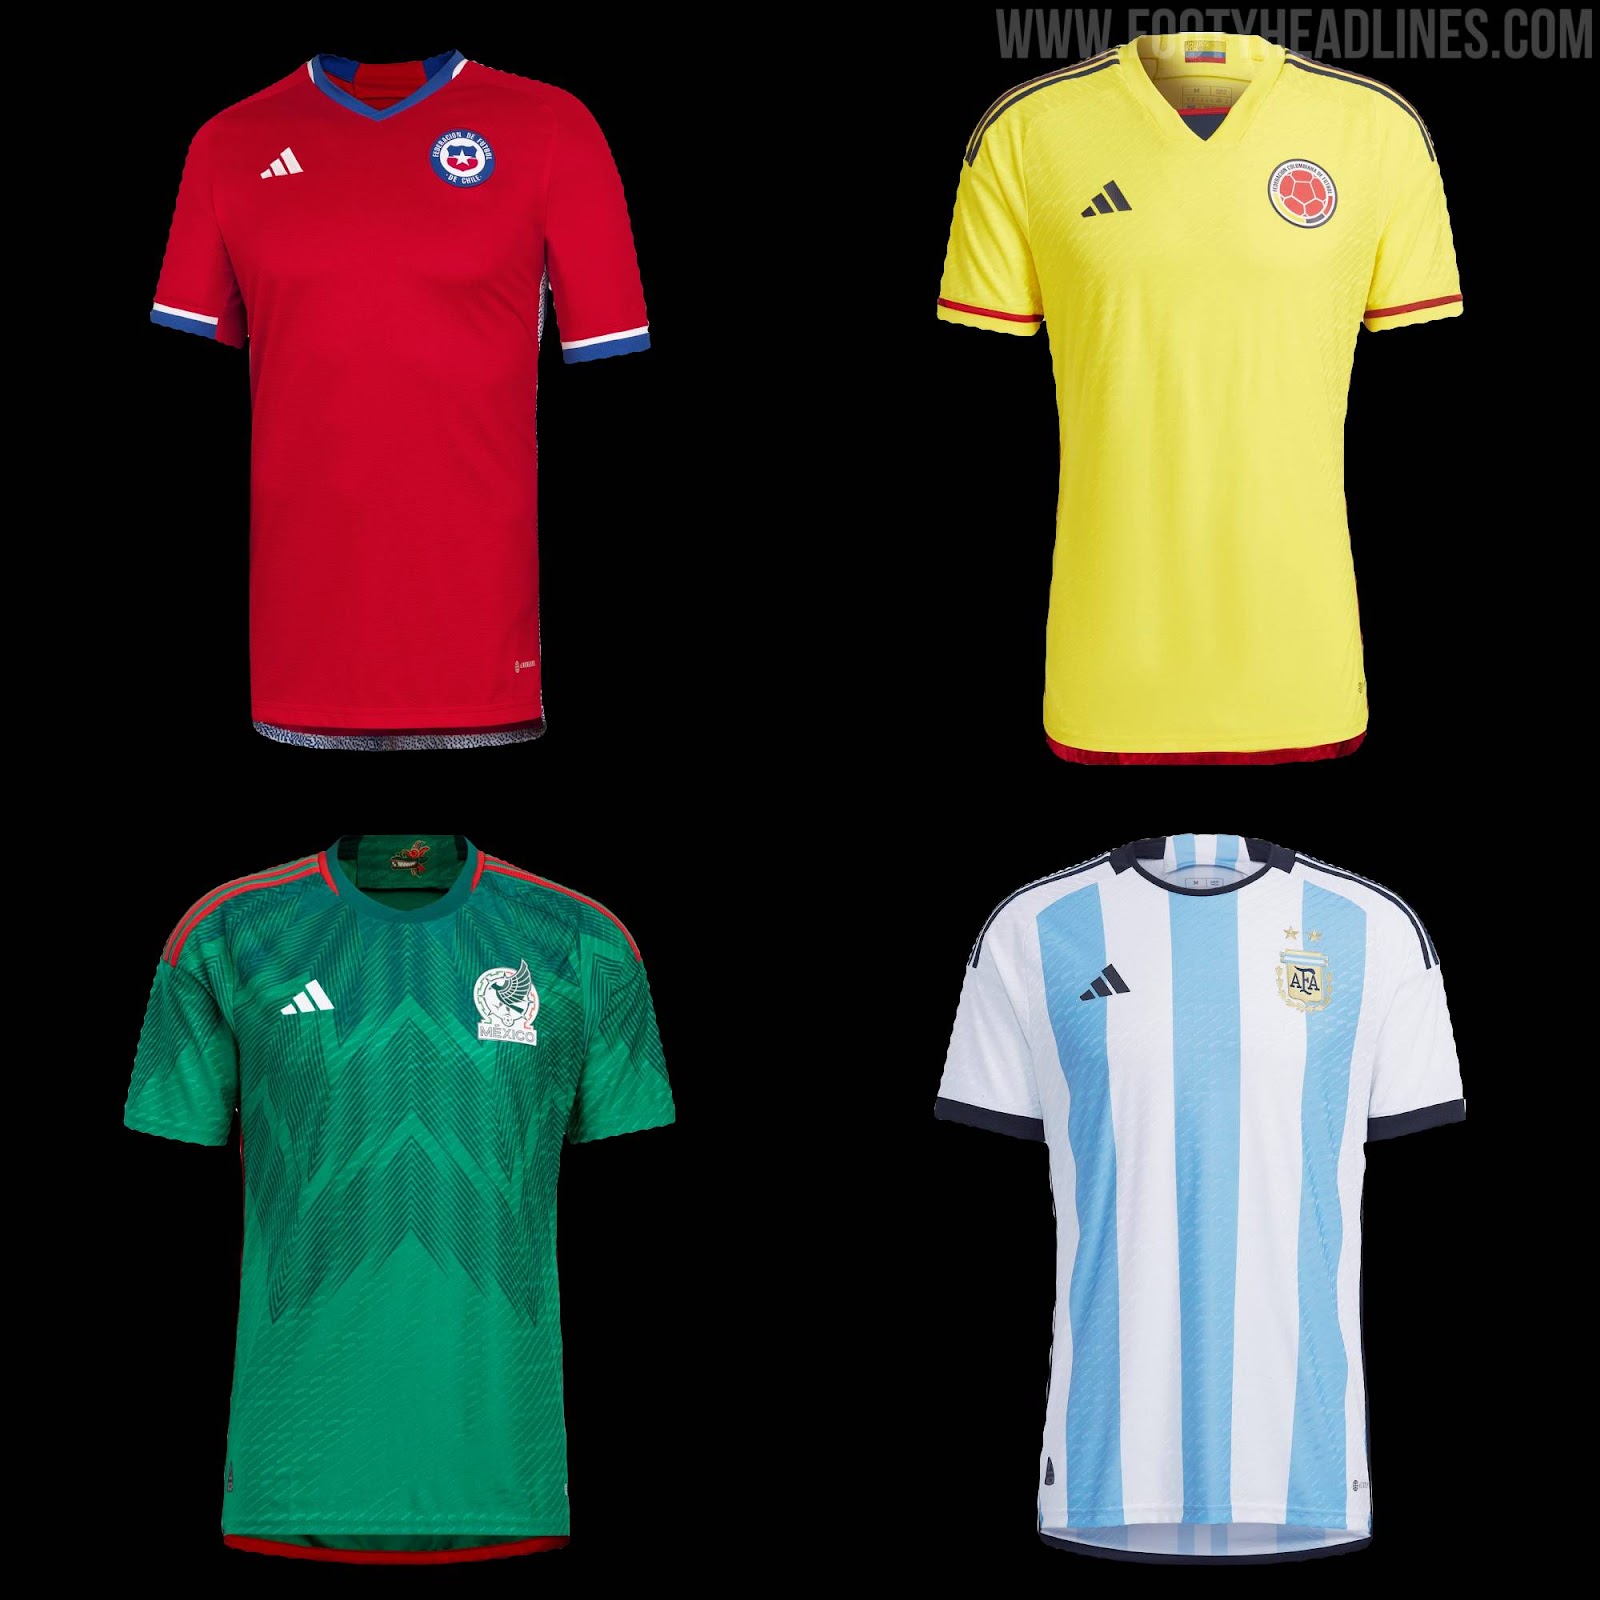 Adidas Releases Slew of New National Team Kits Ahead of 2022 World